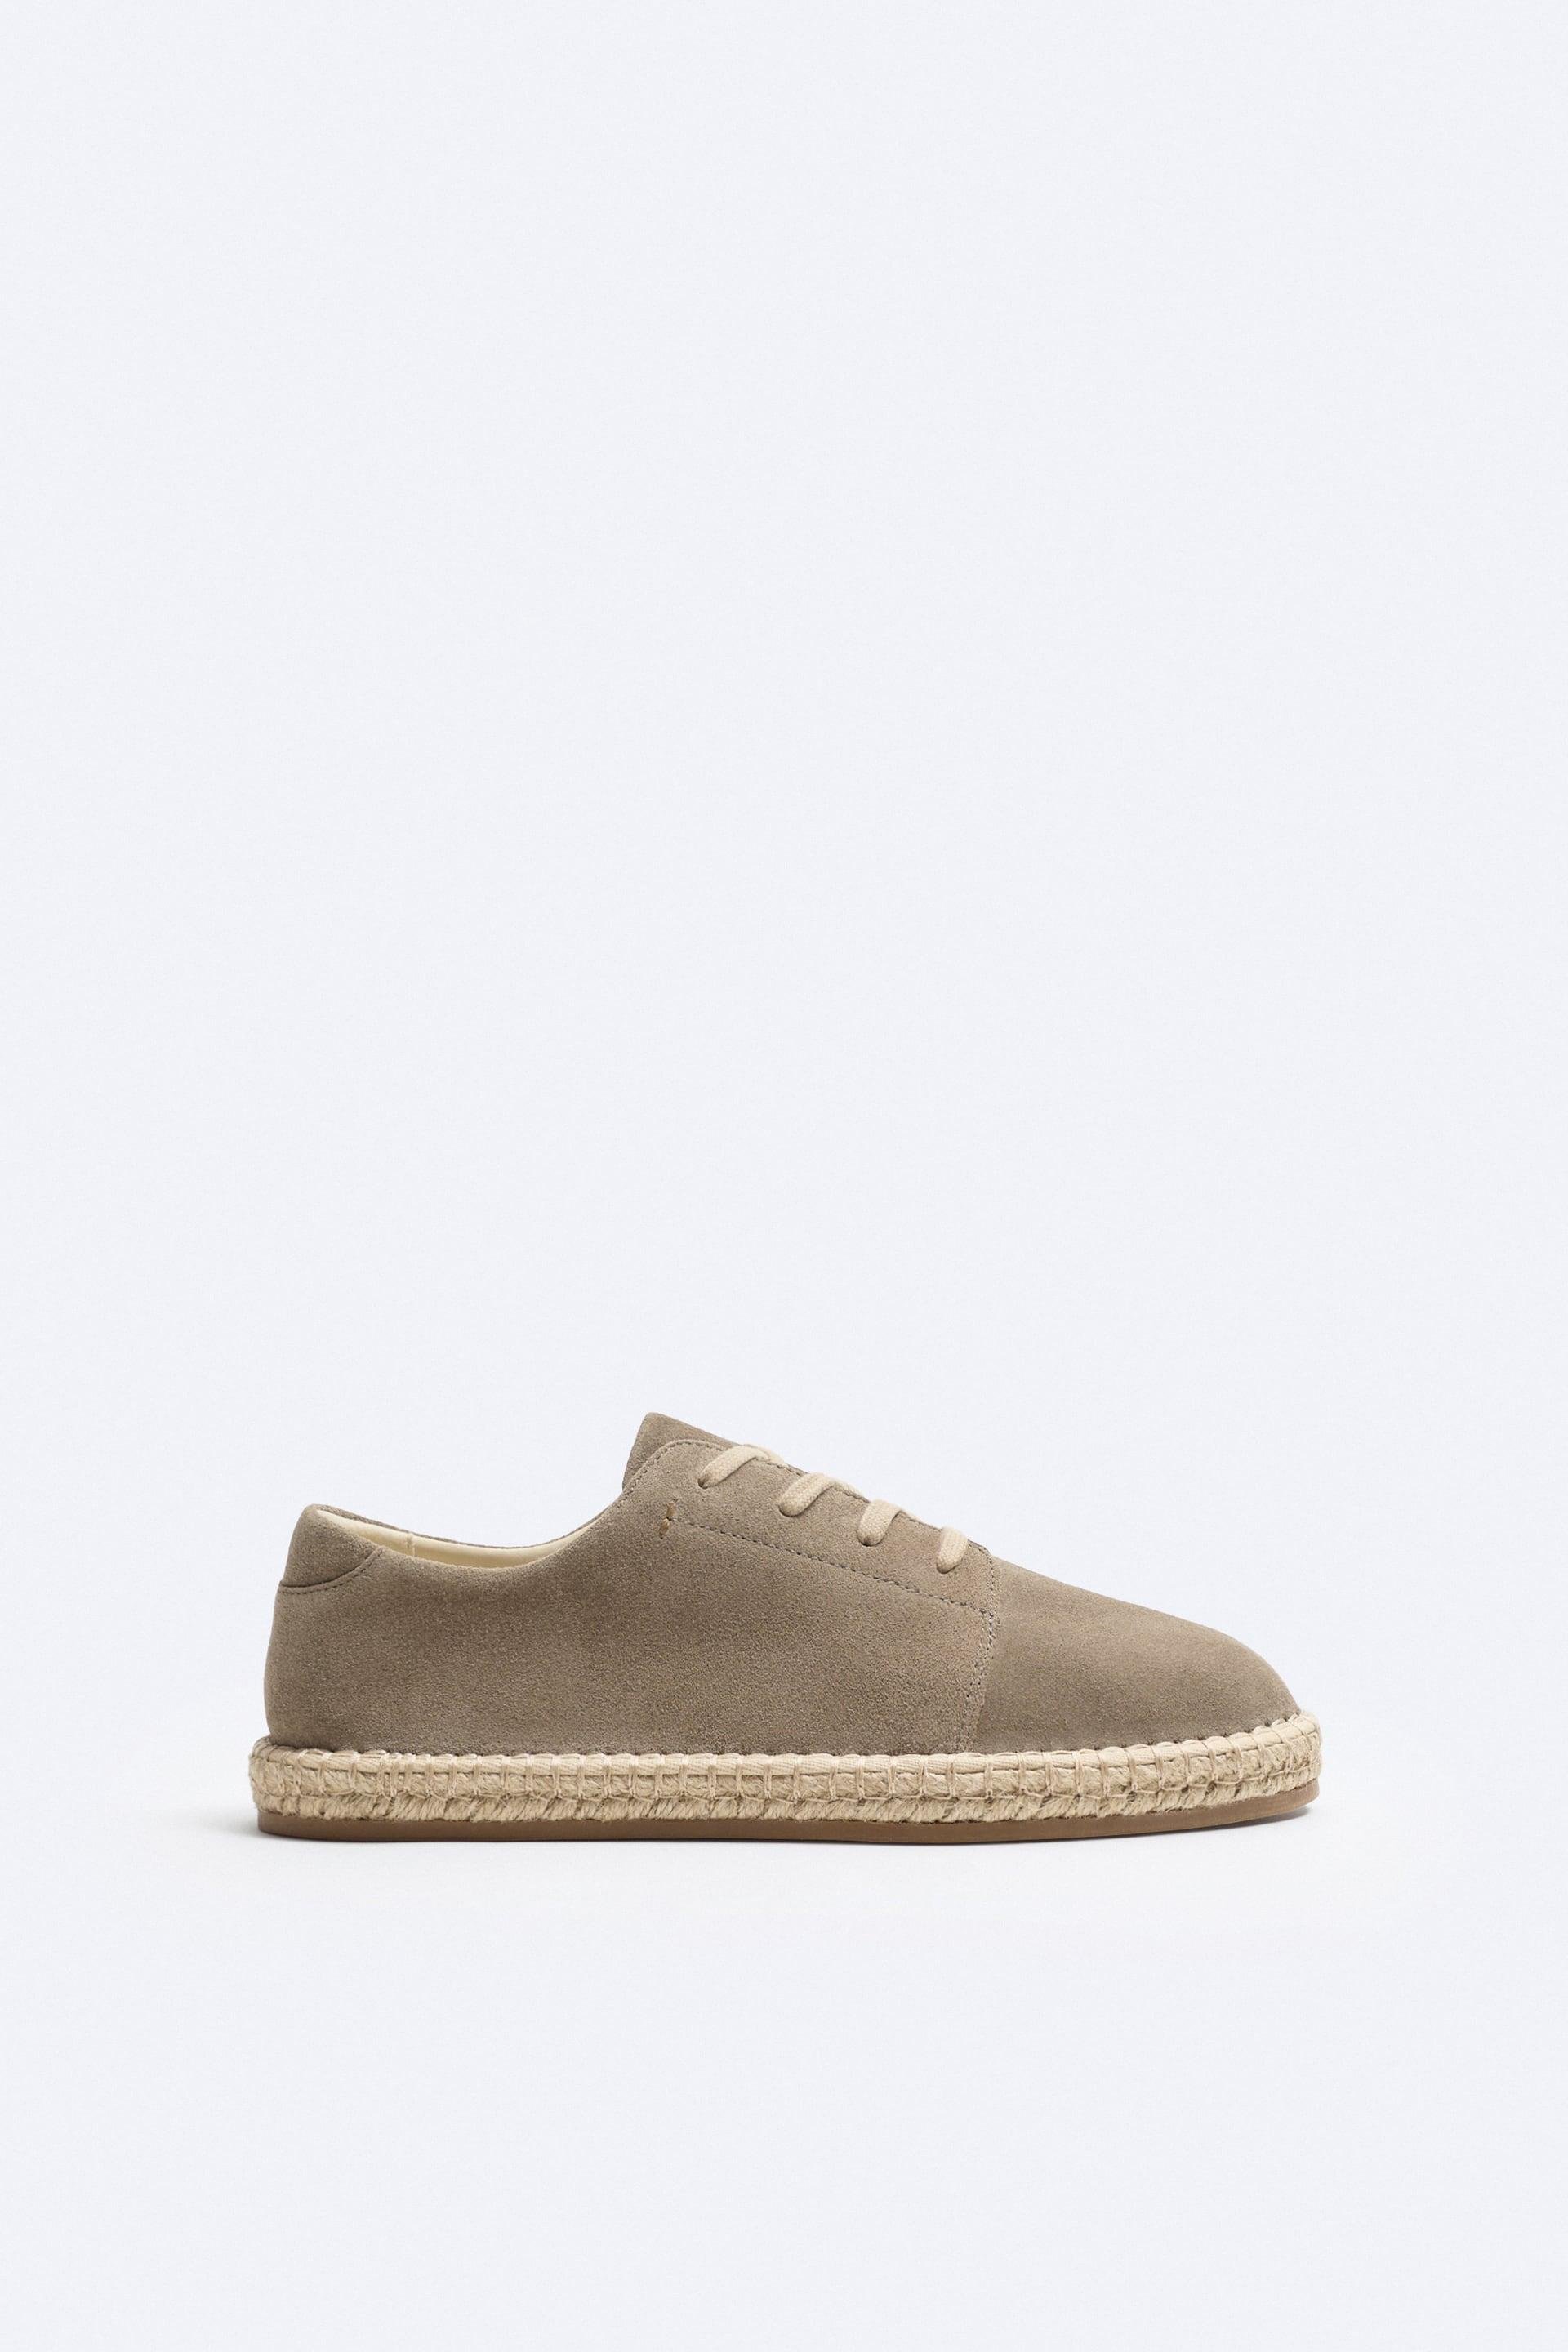 LACE UP SUEDE ESPADRILLES by ZARA